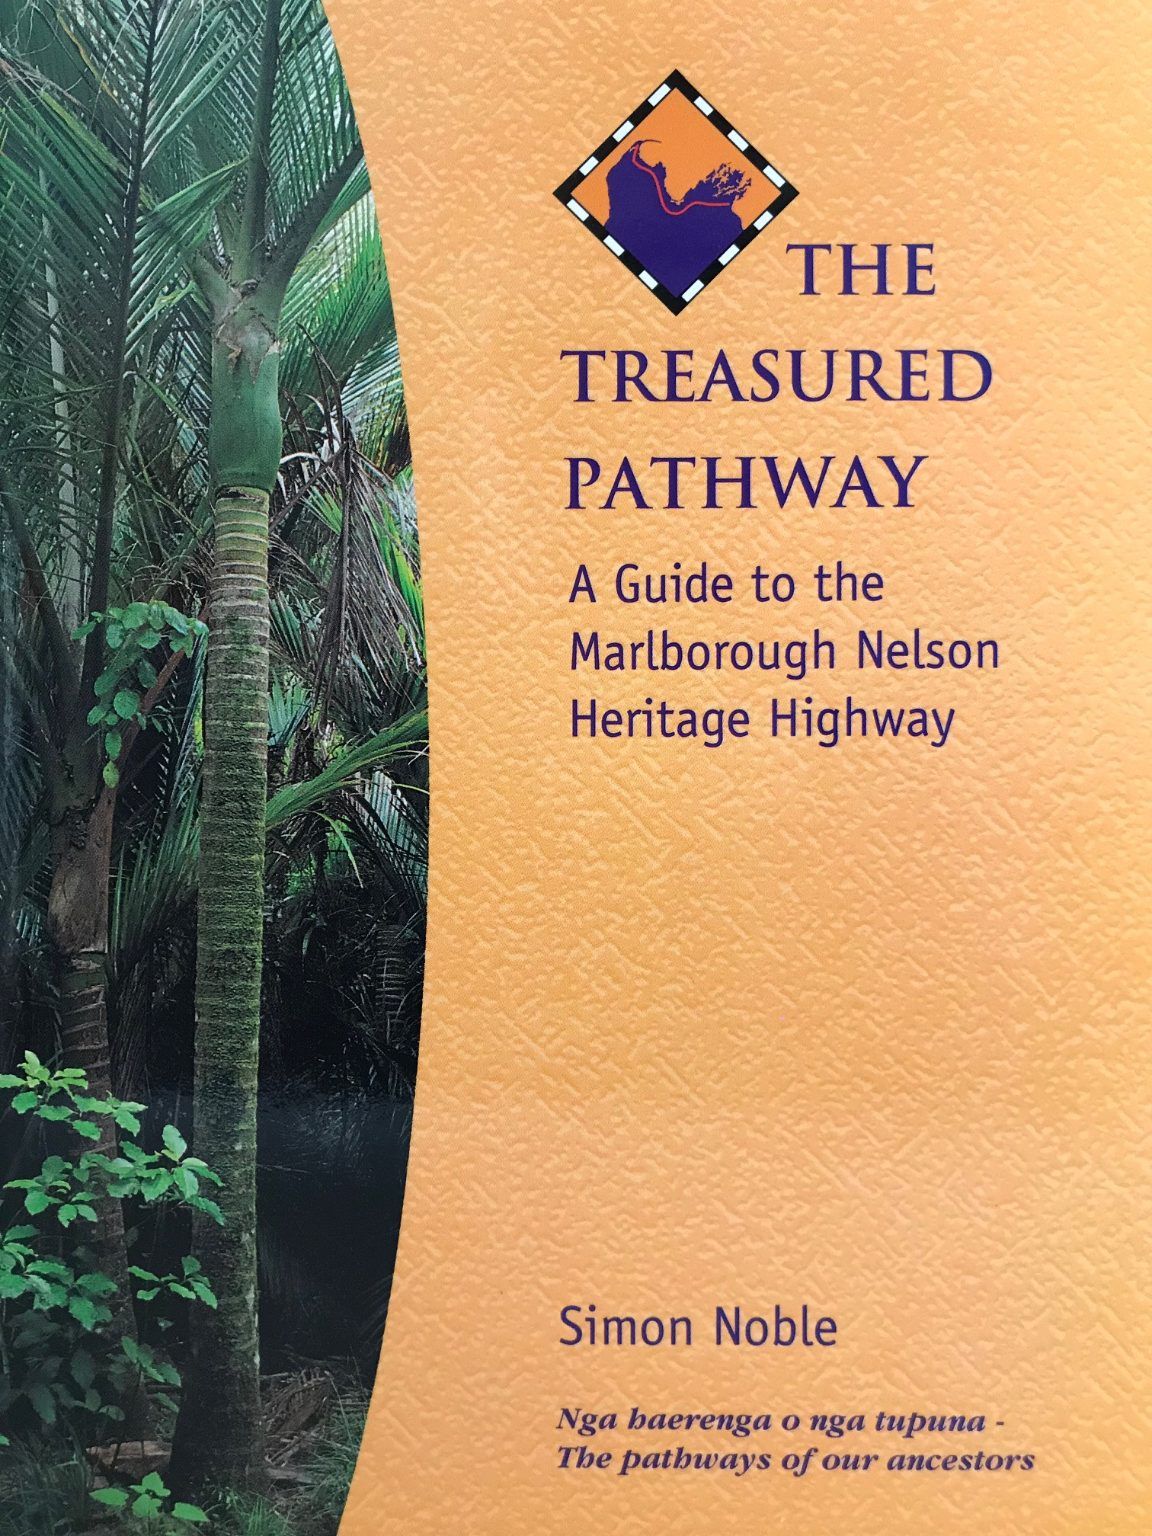 THE TREASURED PATHWAY: A Guide to the Marlborough Nelson Heritage Highway